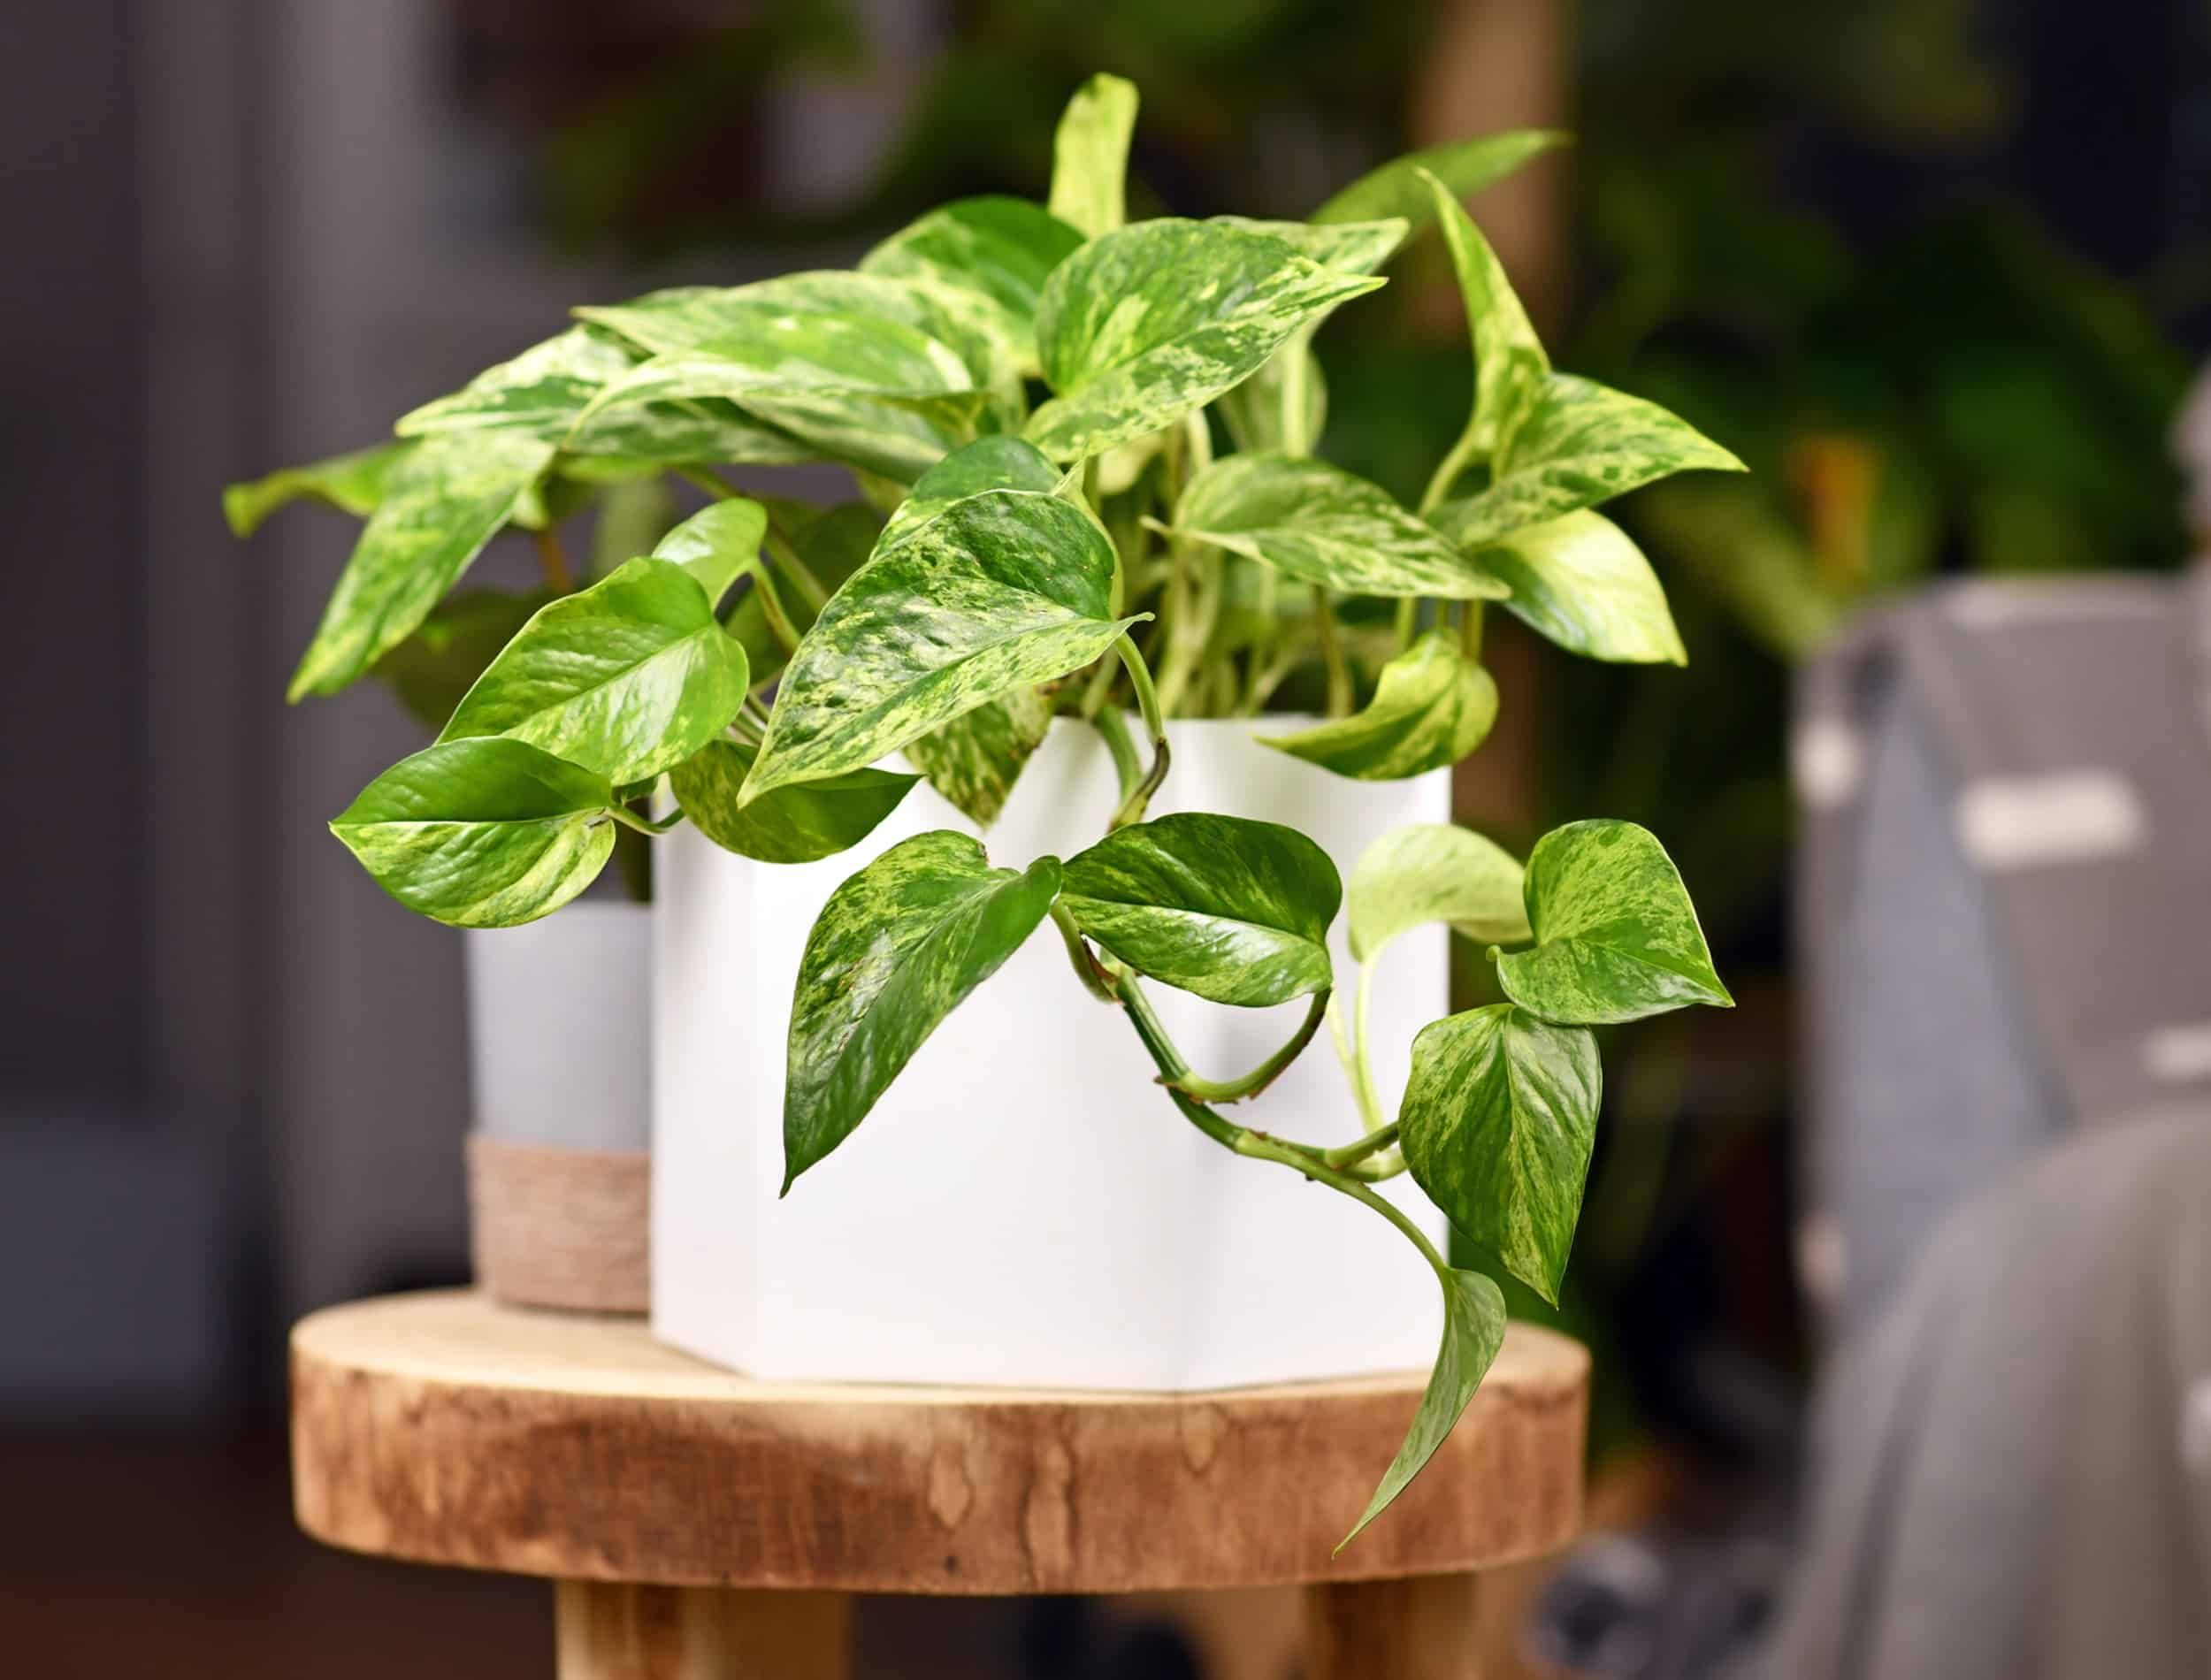 Tropical 'Epipremnum Aureum Marble Queen' pothos houseplant with white variegation in flower pot on wooden table